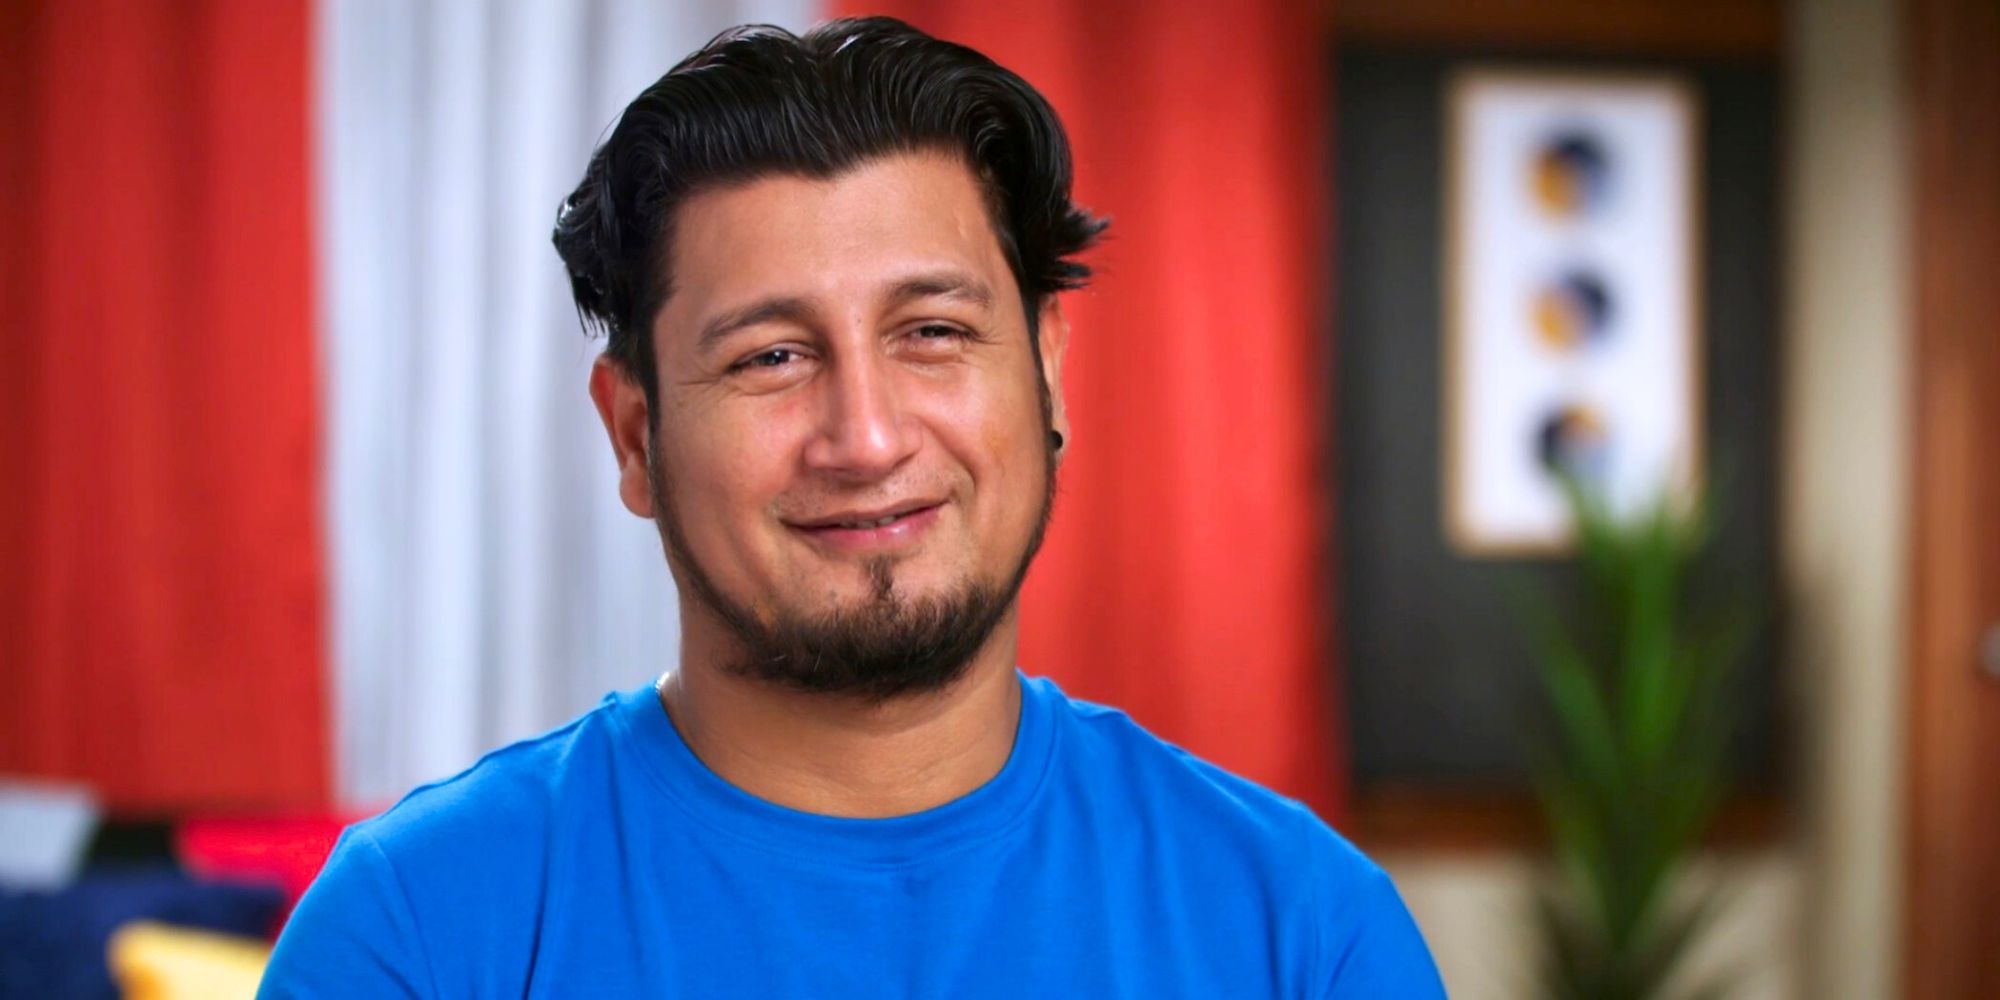 Manuel 90 Day Fiance season 10 in blue shirt for interview